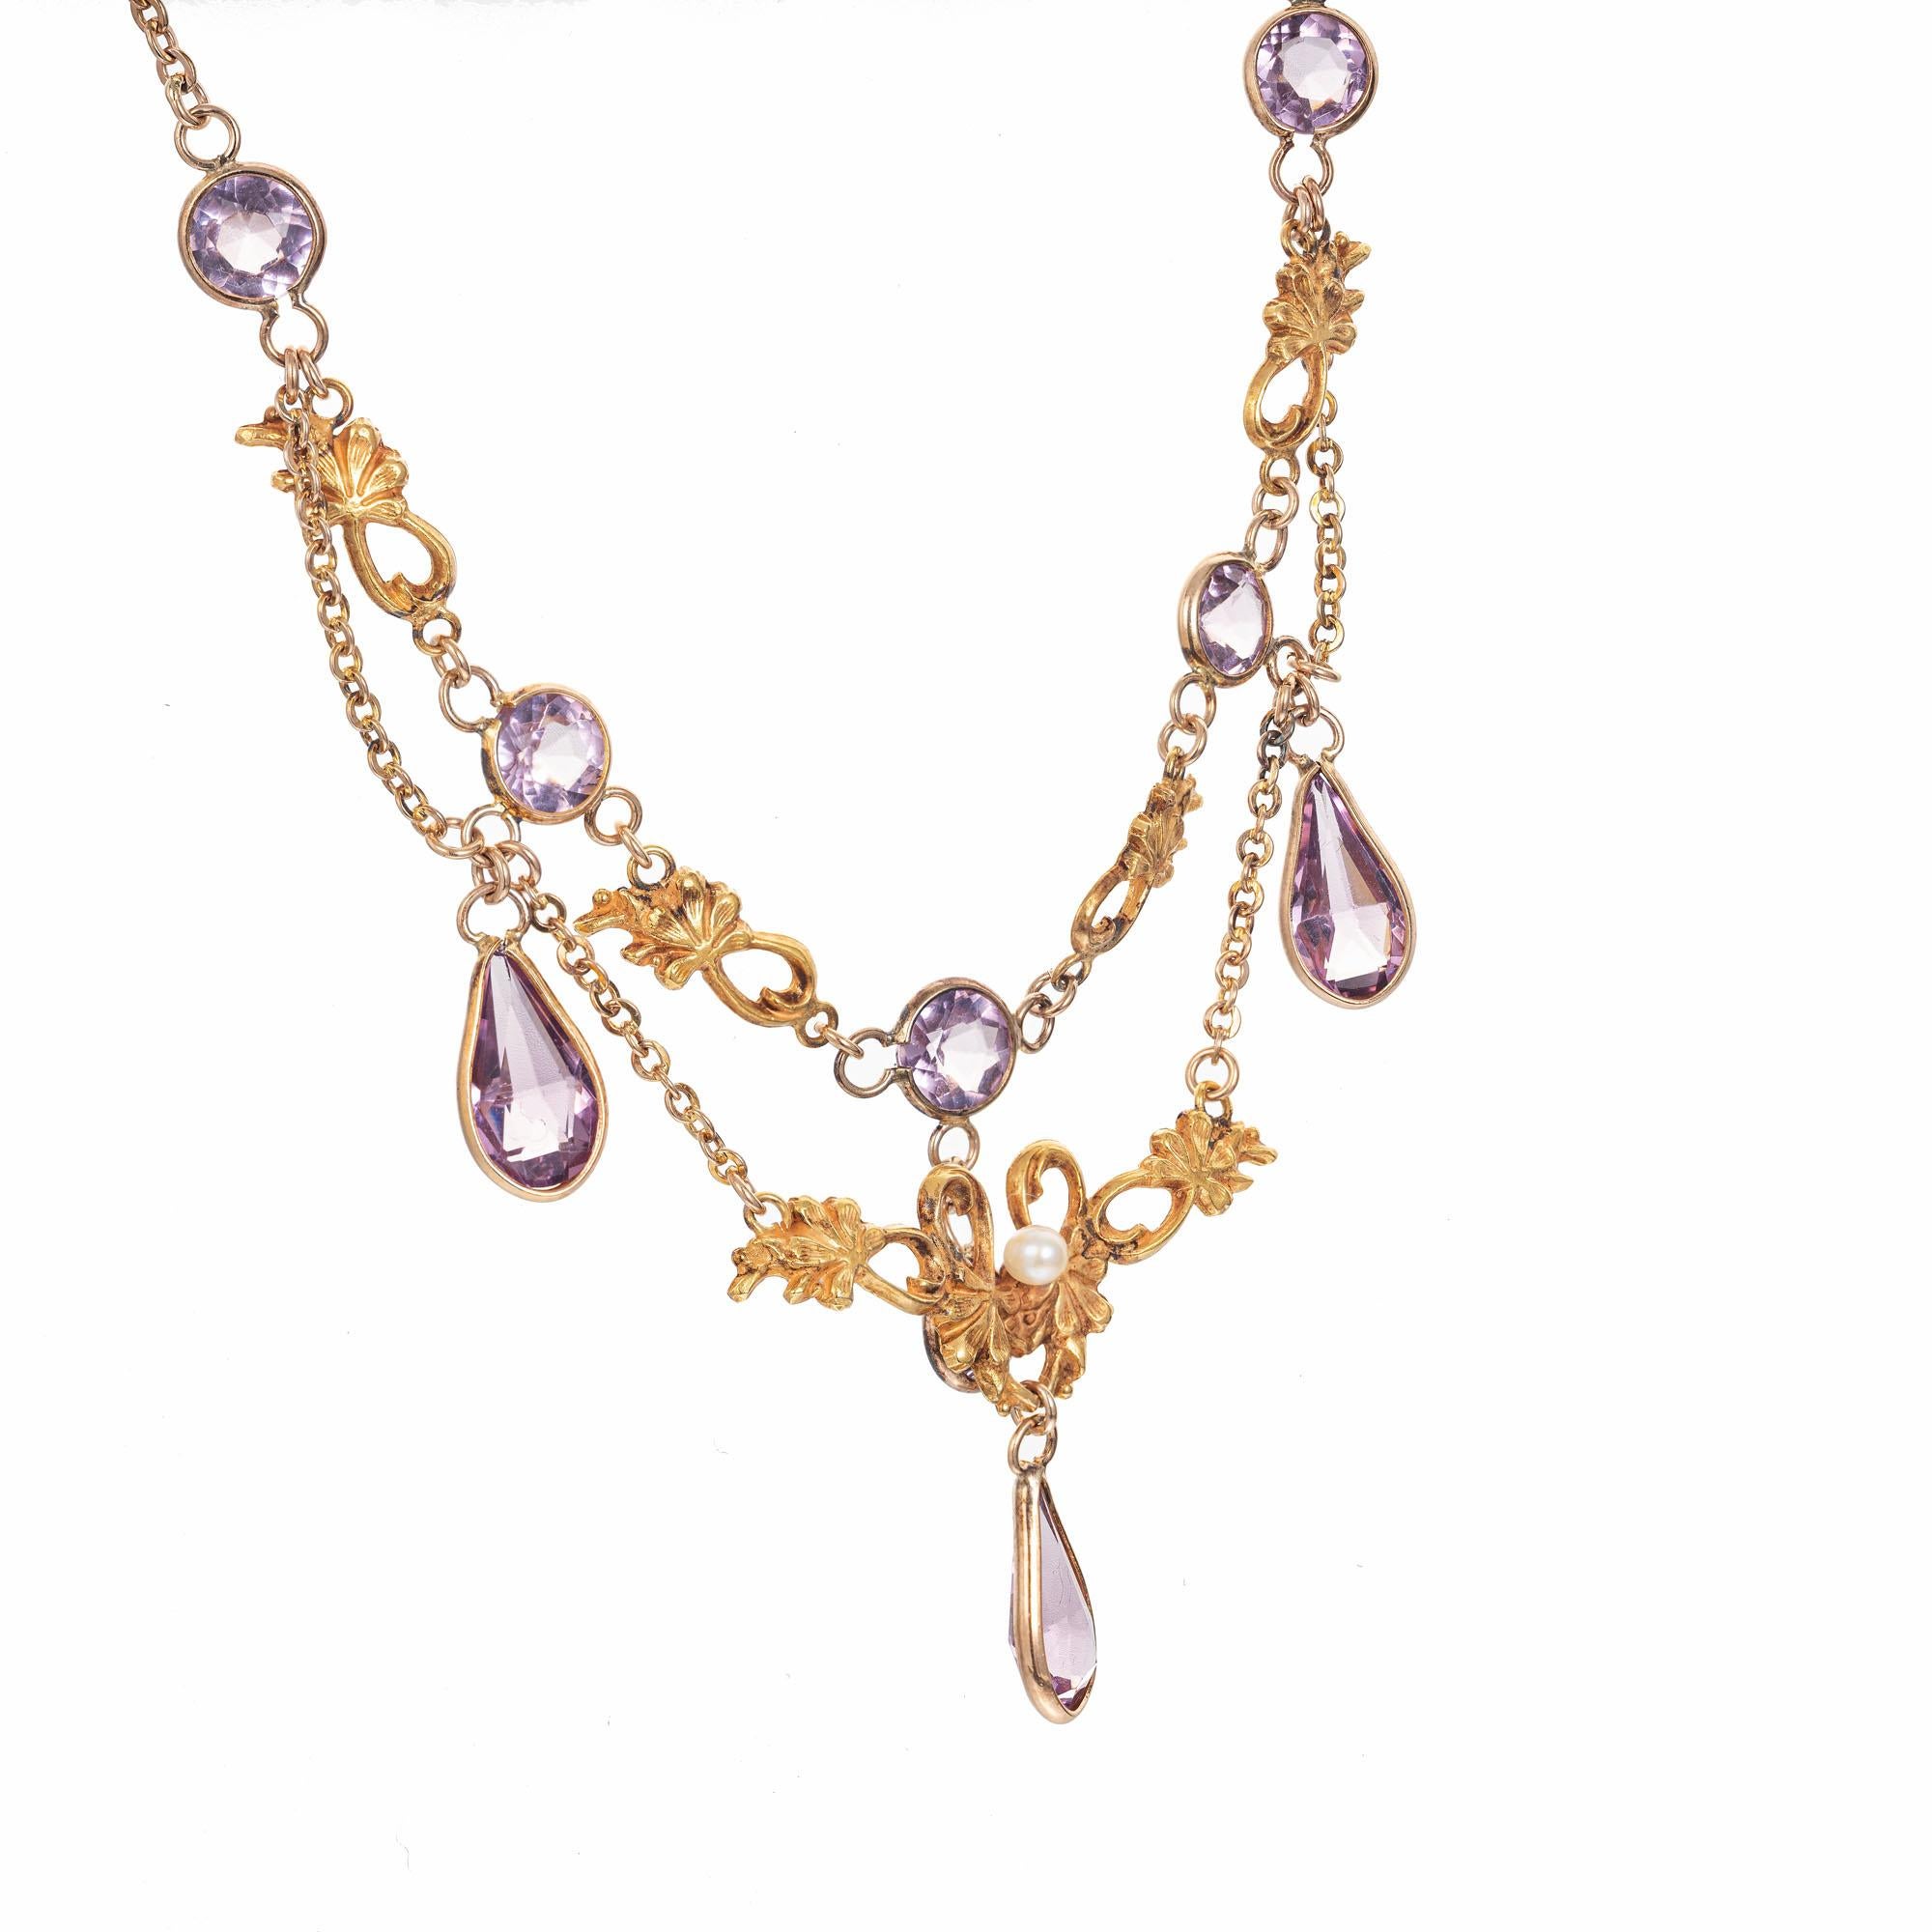 Victorian, 1900's Pearl and amethyst drop necklace.  5 round amethysts with 3 pear shaped amethyst dangles. in 14k yellow gold with one round center pearl. 18.5 inches in length. 

One 2.7mm natural pearl
5 round Amethyst, approx. total weight